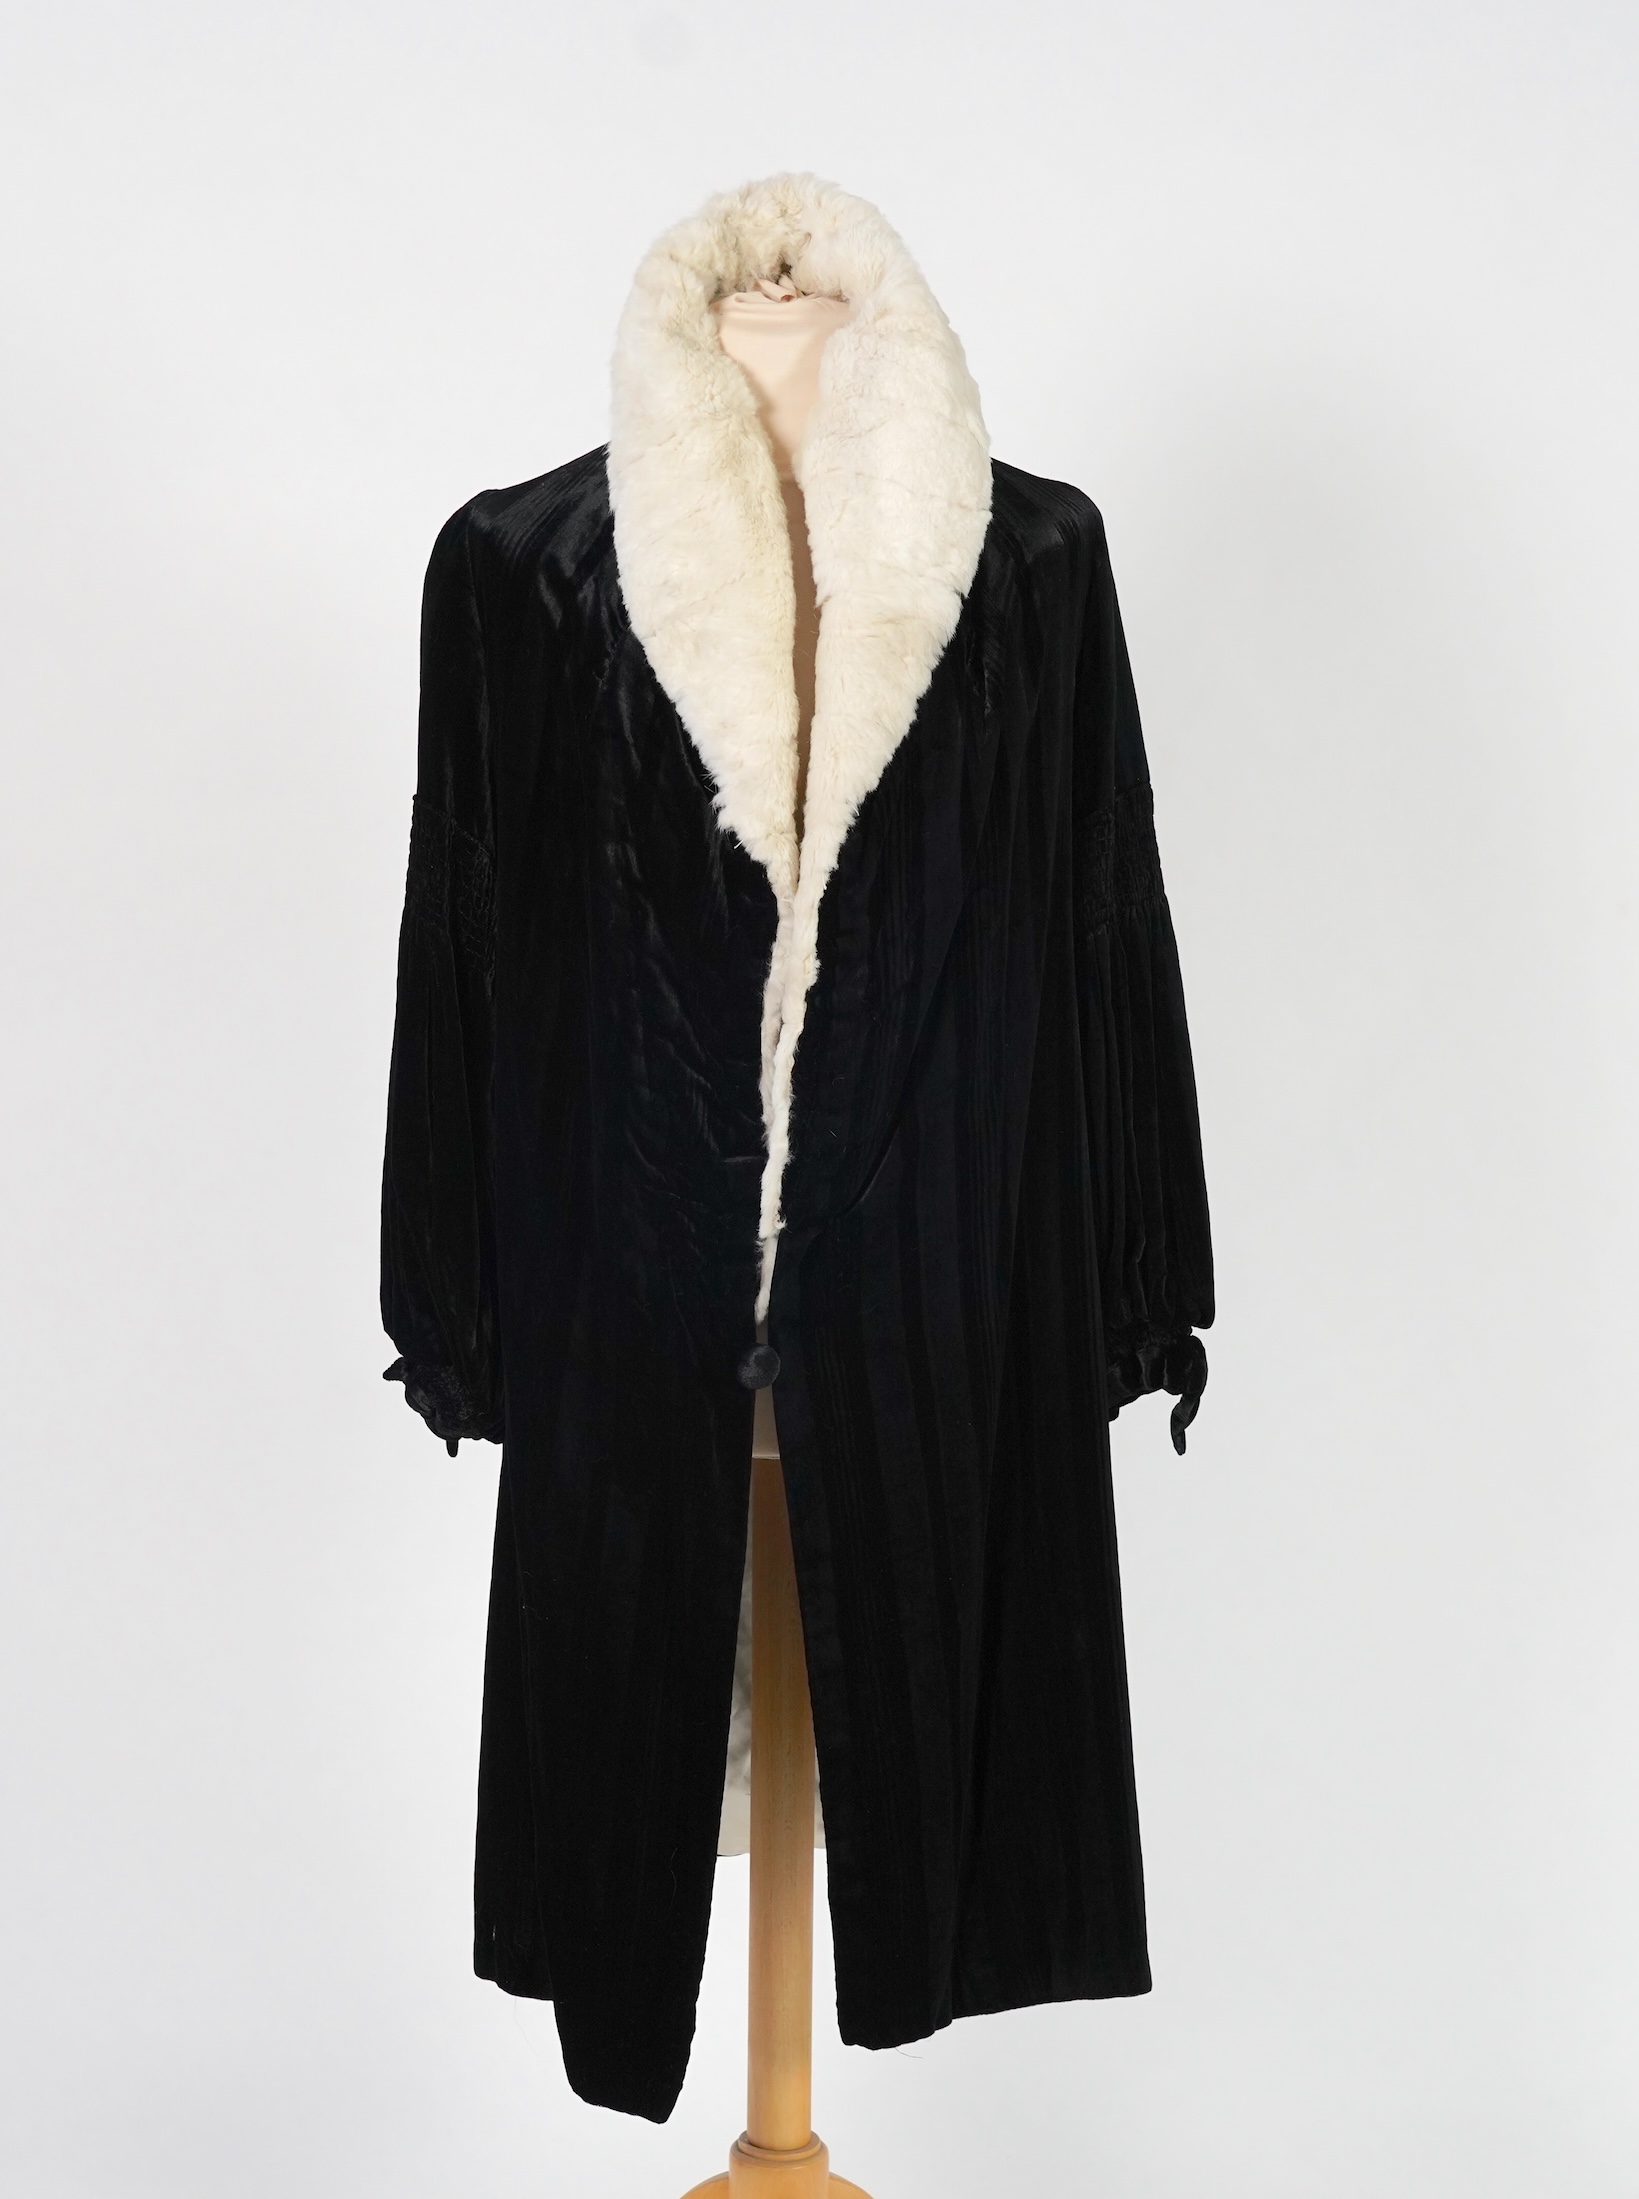 A 1920's ladies black striped silk velvet opera coat with a wide white fur collar and cream satin lining.